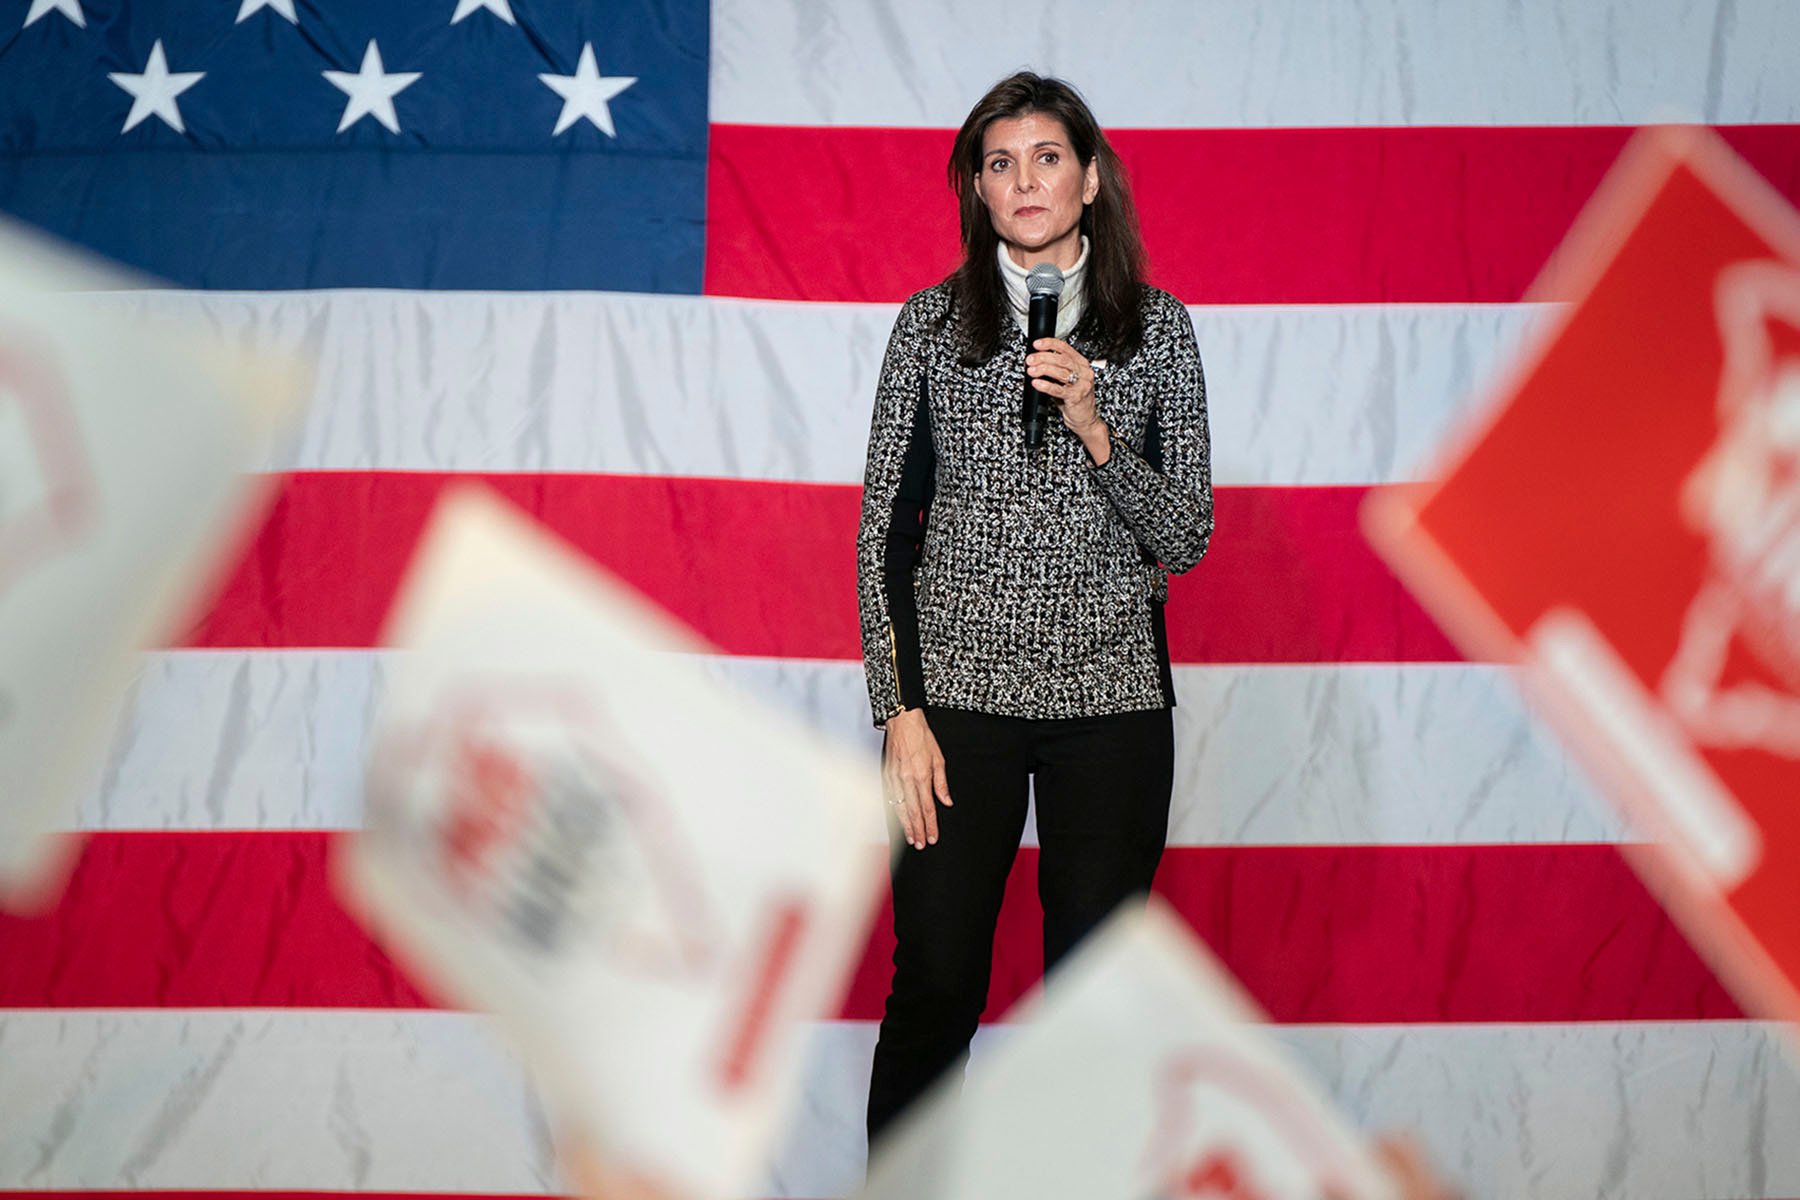 Republican presidential candidate Nikki Haley speaks to a crowd during a campaign rally at Coastal Carolina University in South Carolina.